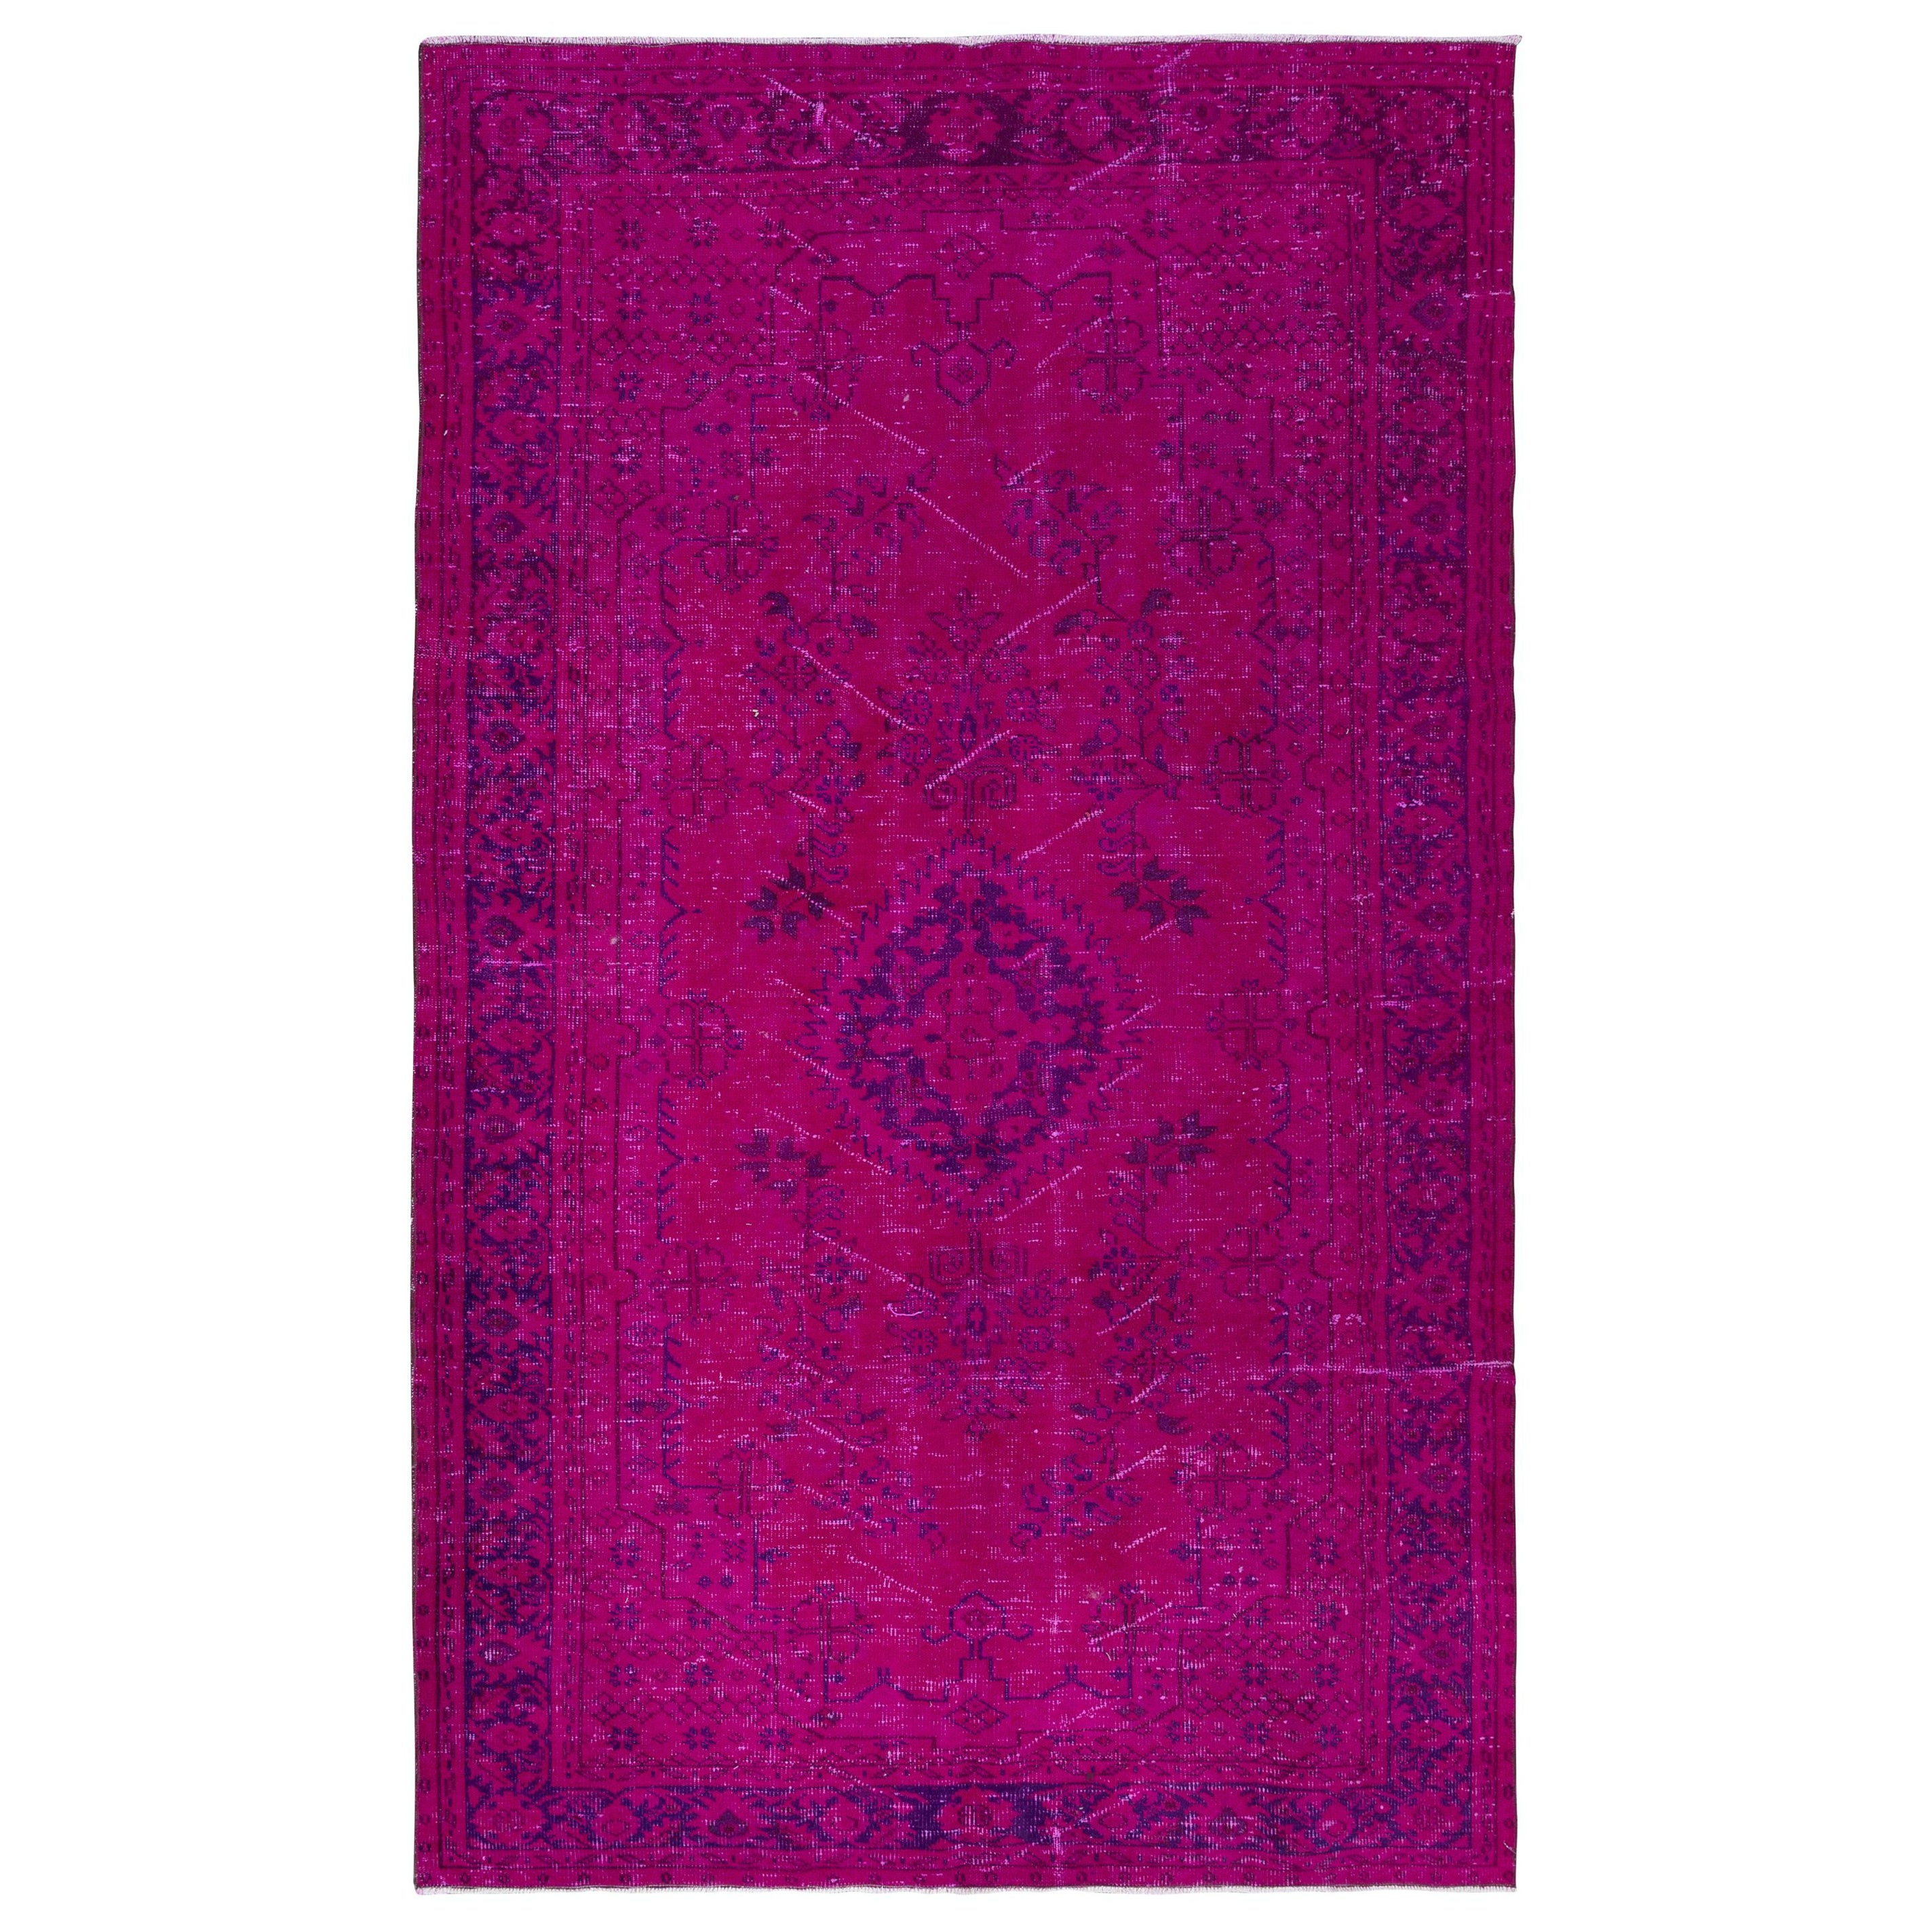 6x9.8 Ft Contemporary Pink Area Rug, Handmade in Turkey, Living Room Carpet For Sale